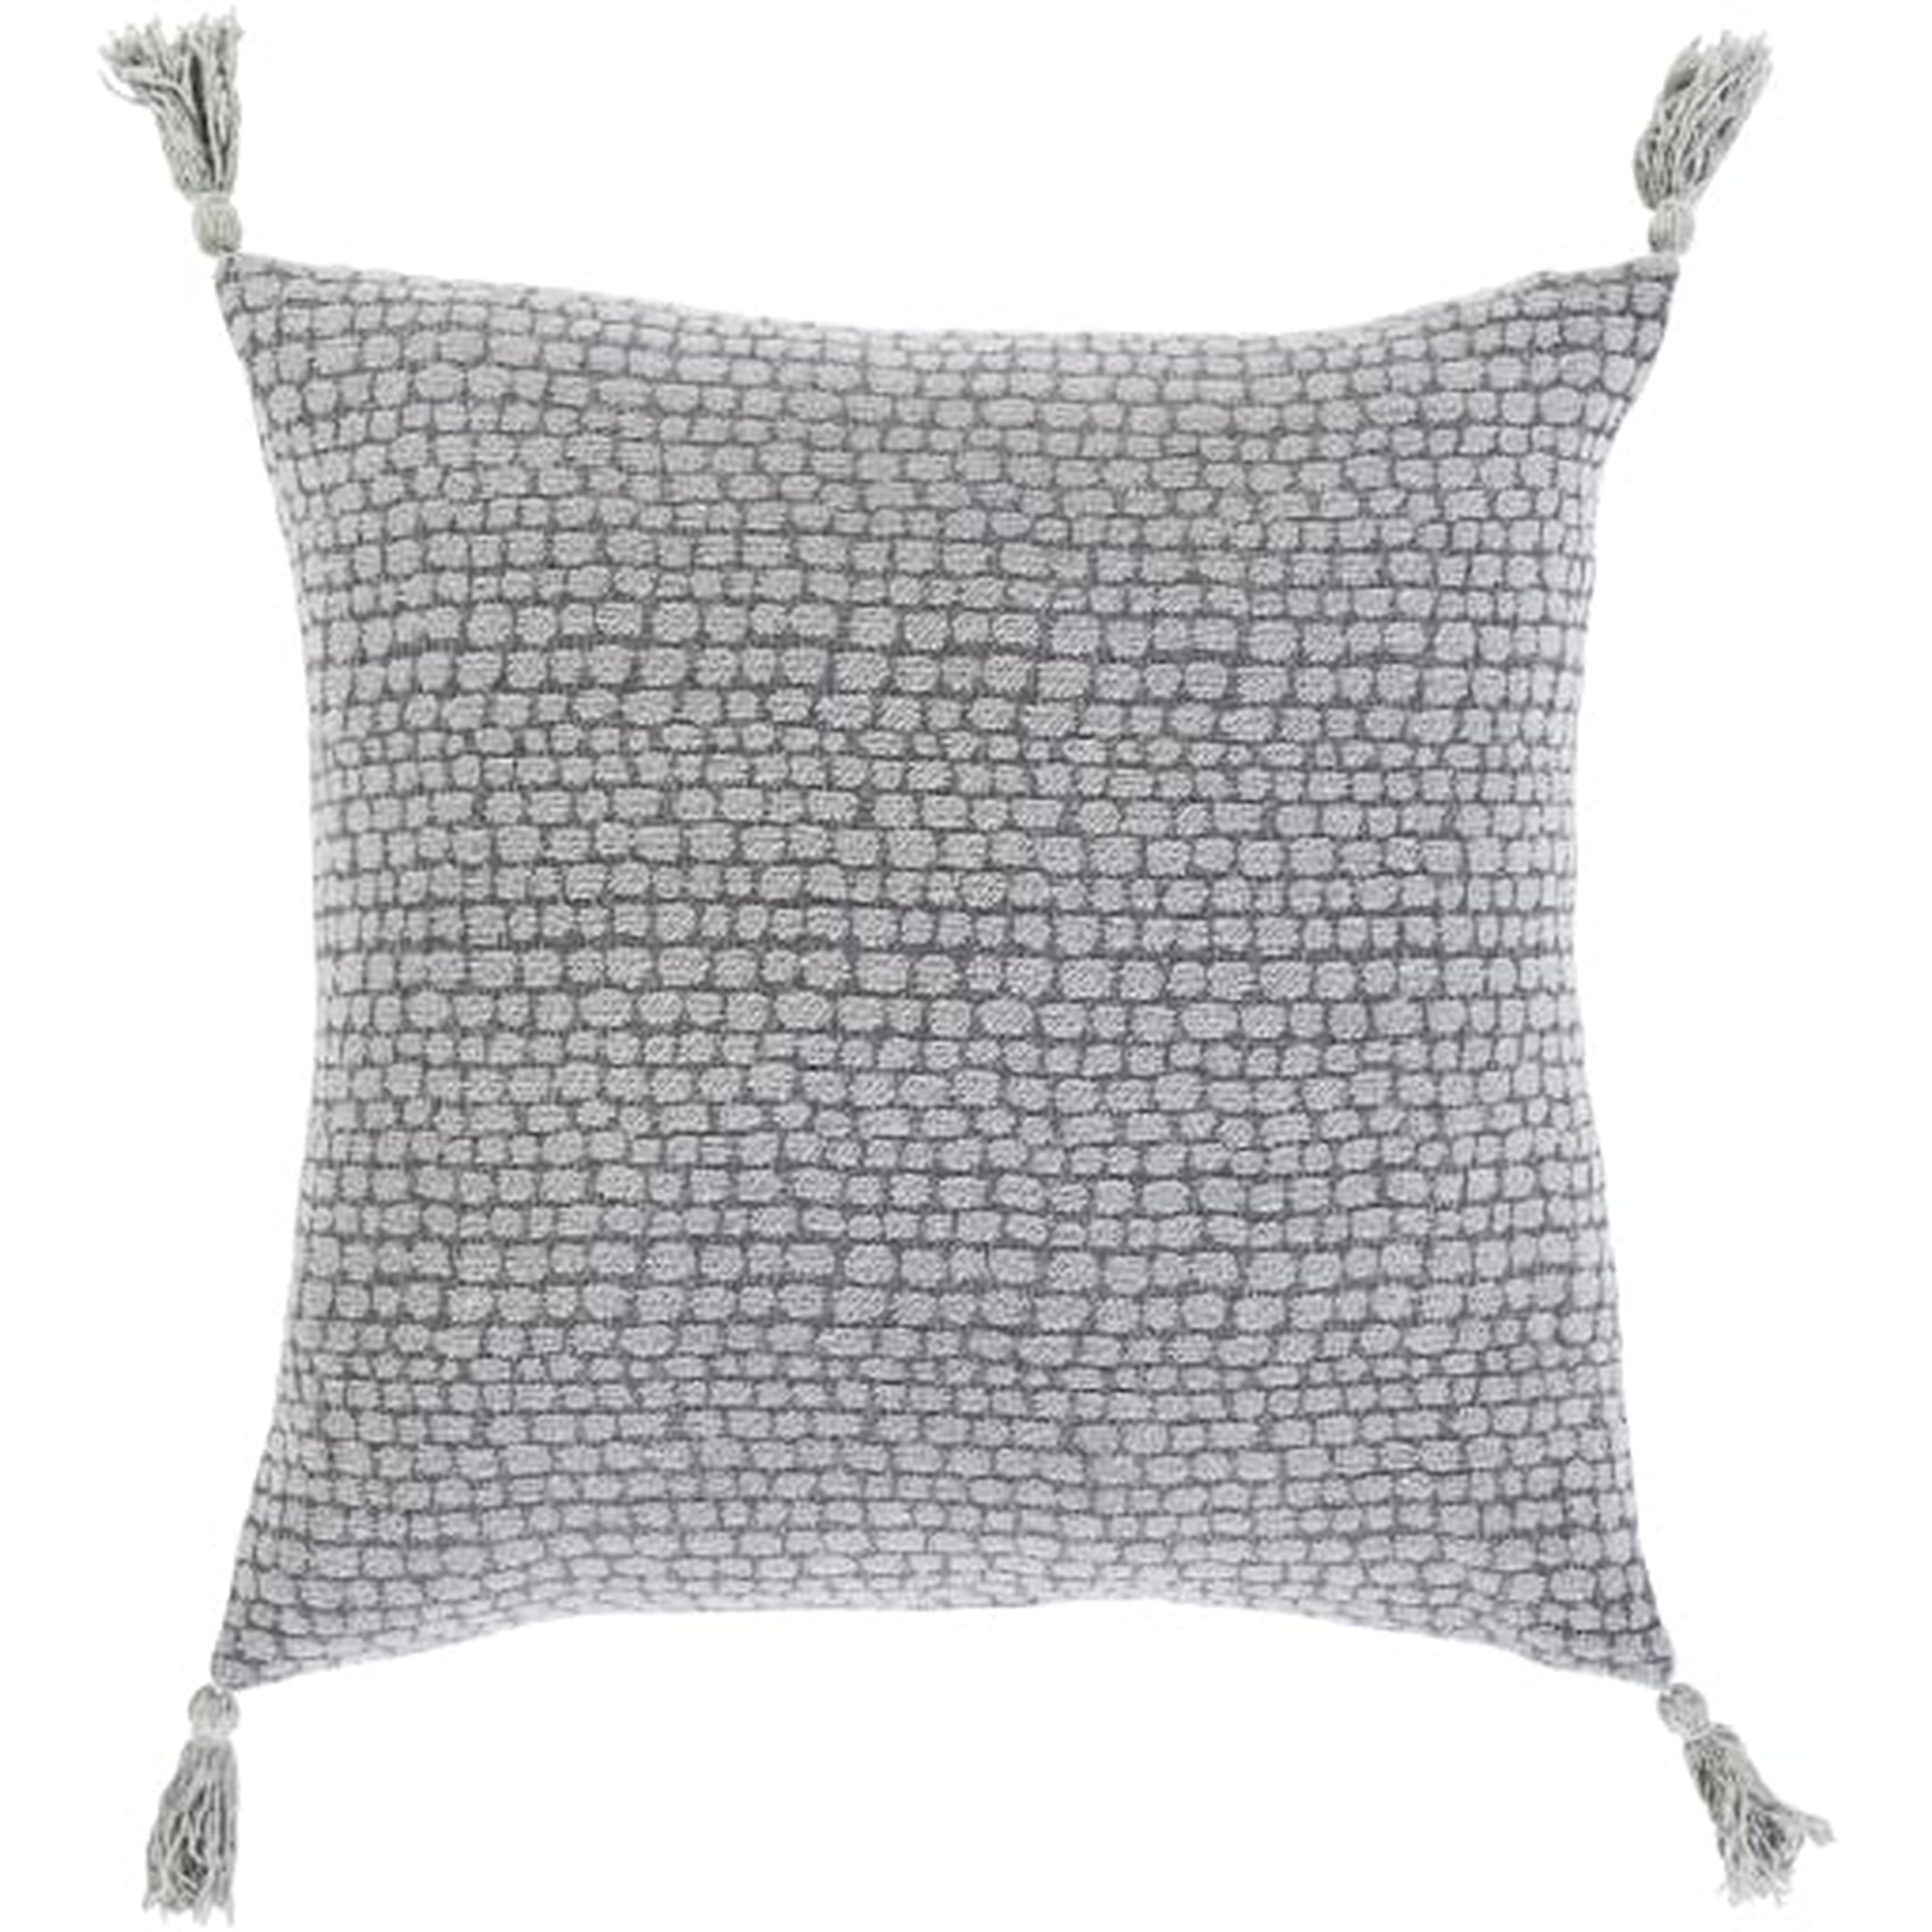 Hadlee Dot Pillow Cover, 22" x 22", Gray - Cove Goods